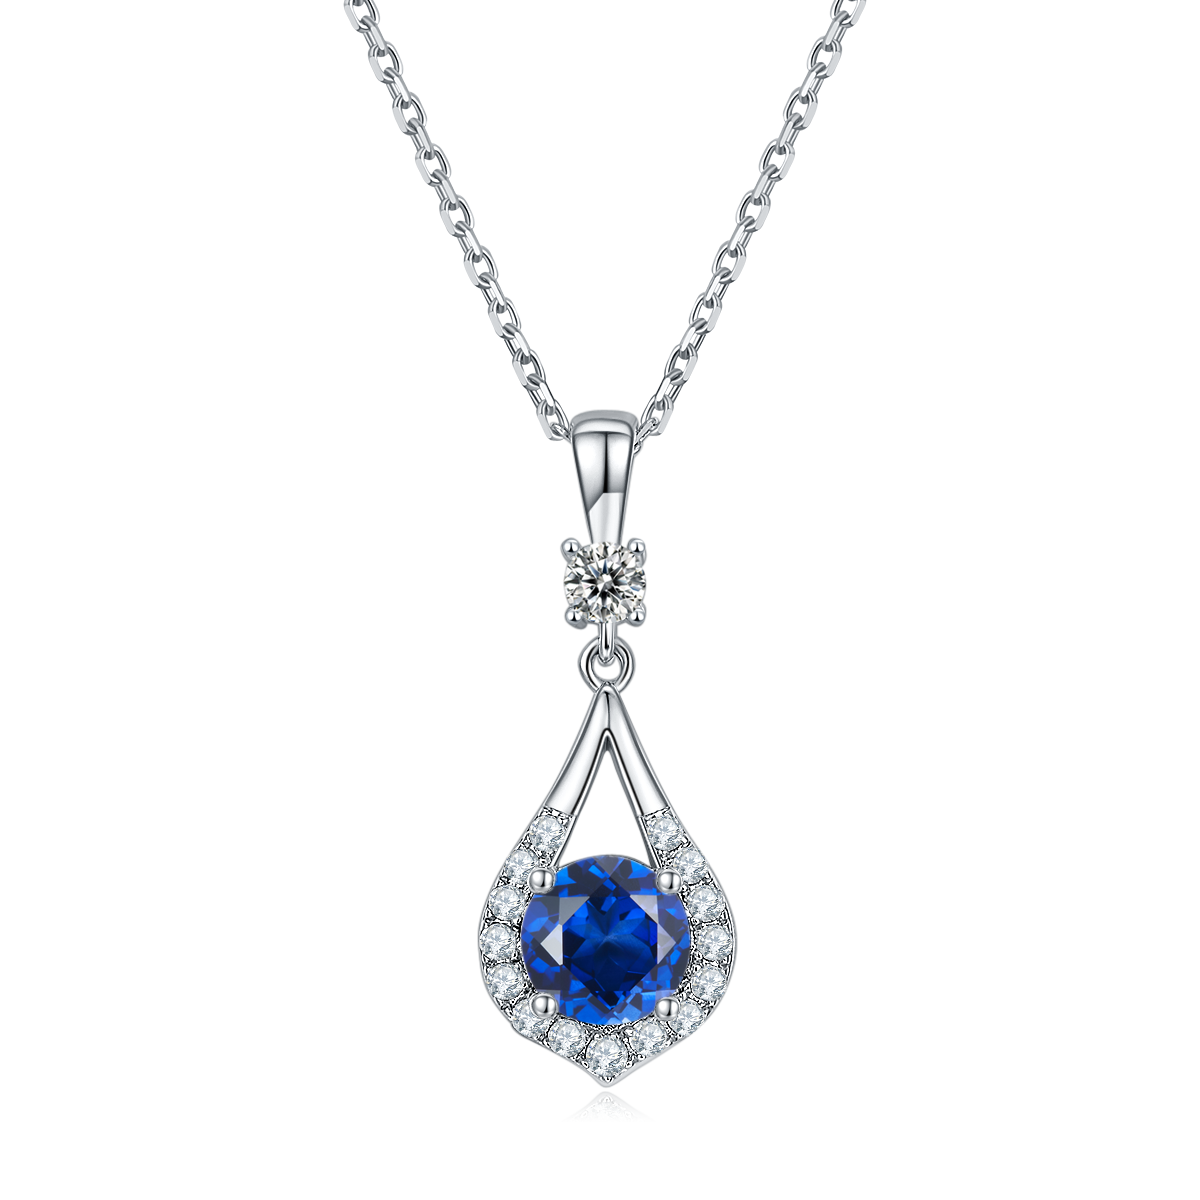 Blue Crystal Waterdrop Necklace for Women